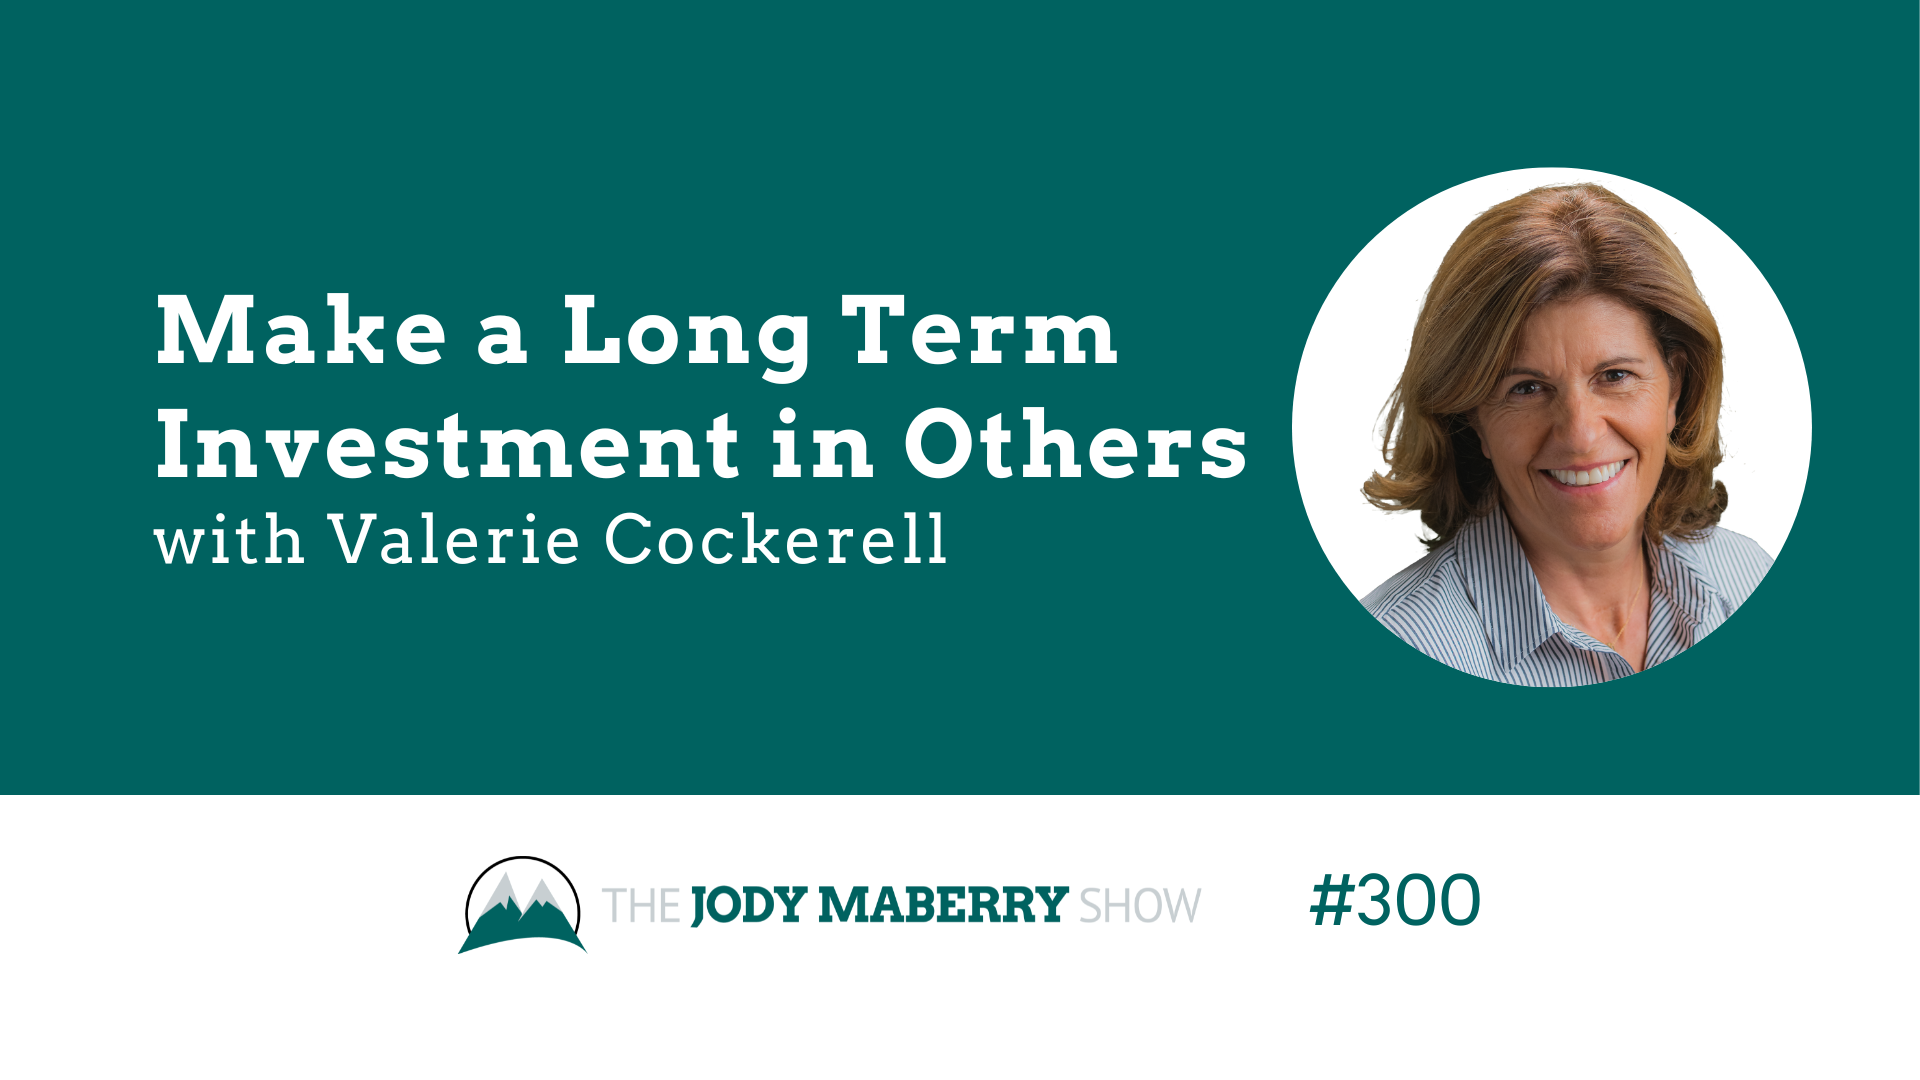 Jody Maberry Show Episode 300 Make a long term investment in others